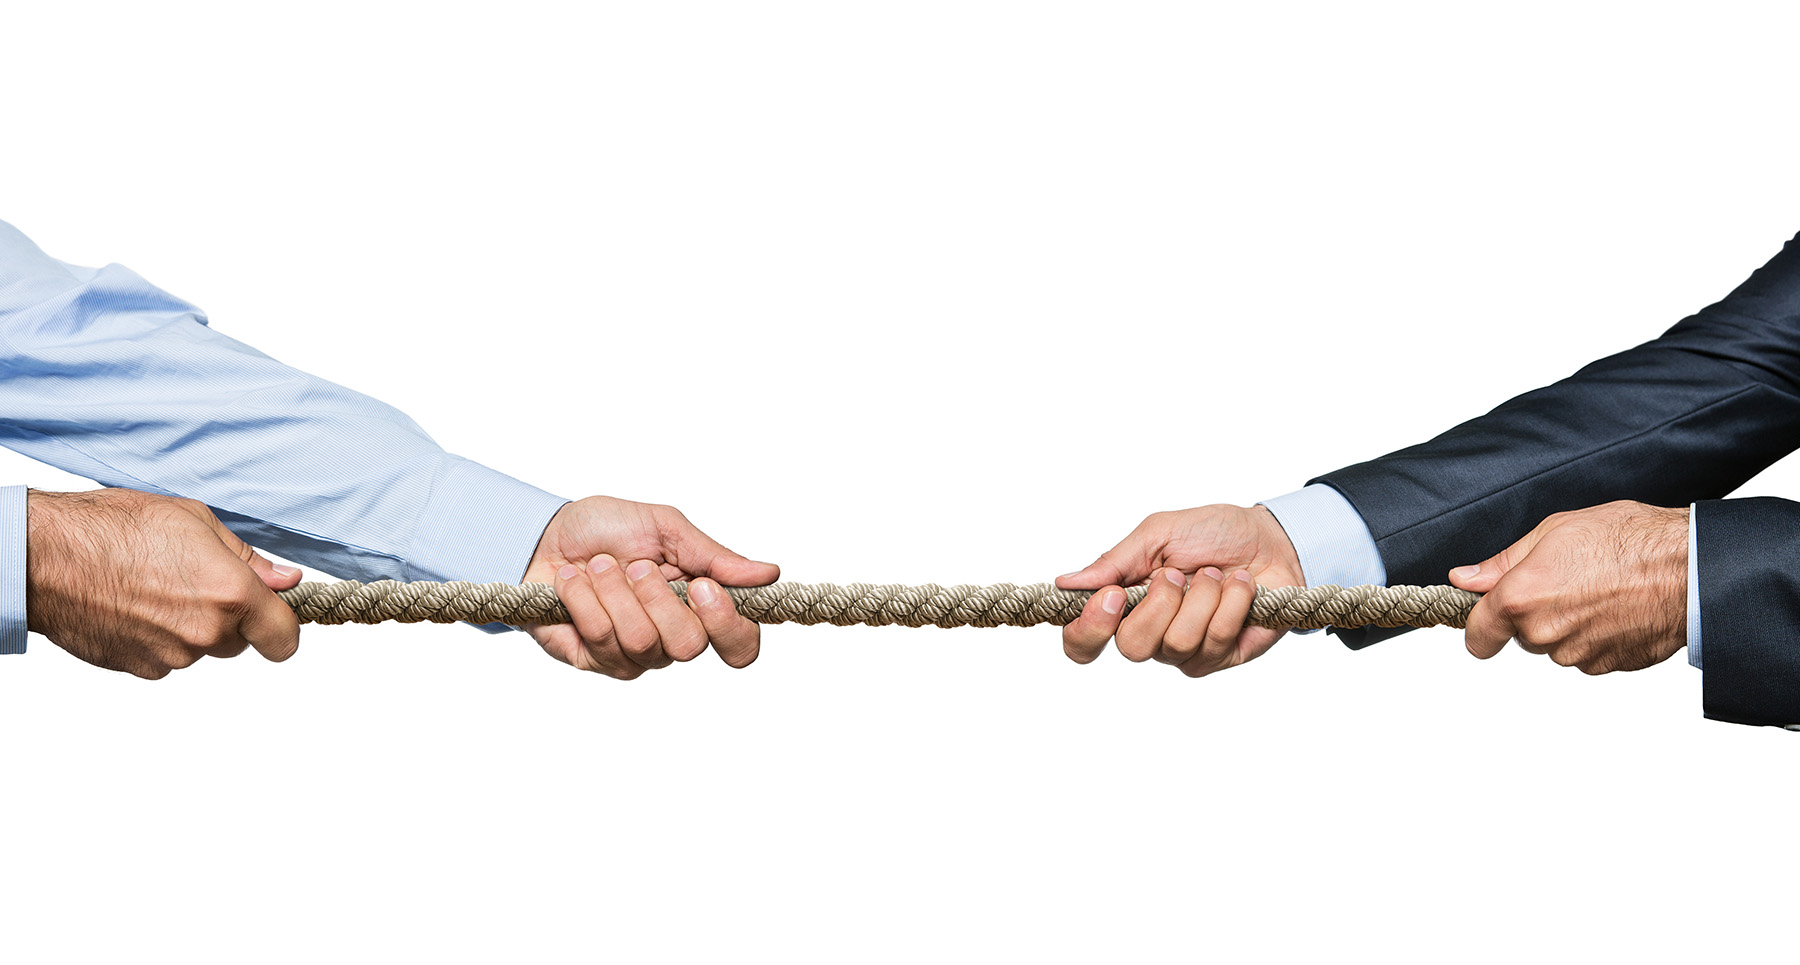 Image shows two pairs of hands tugging on opposite ends of a rope.